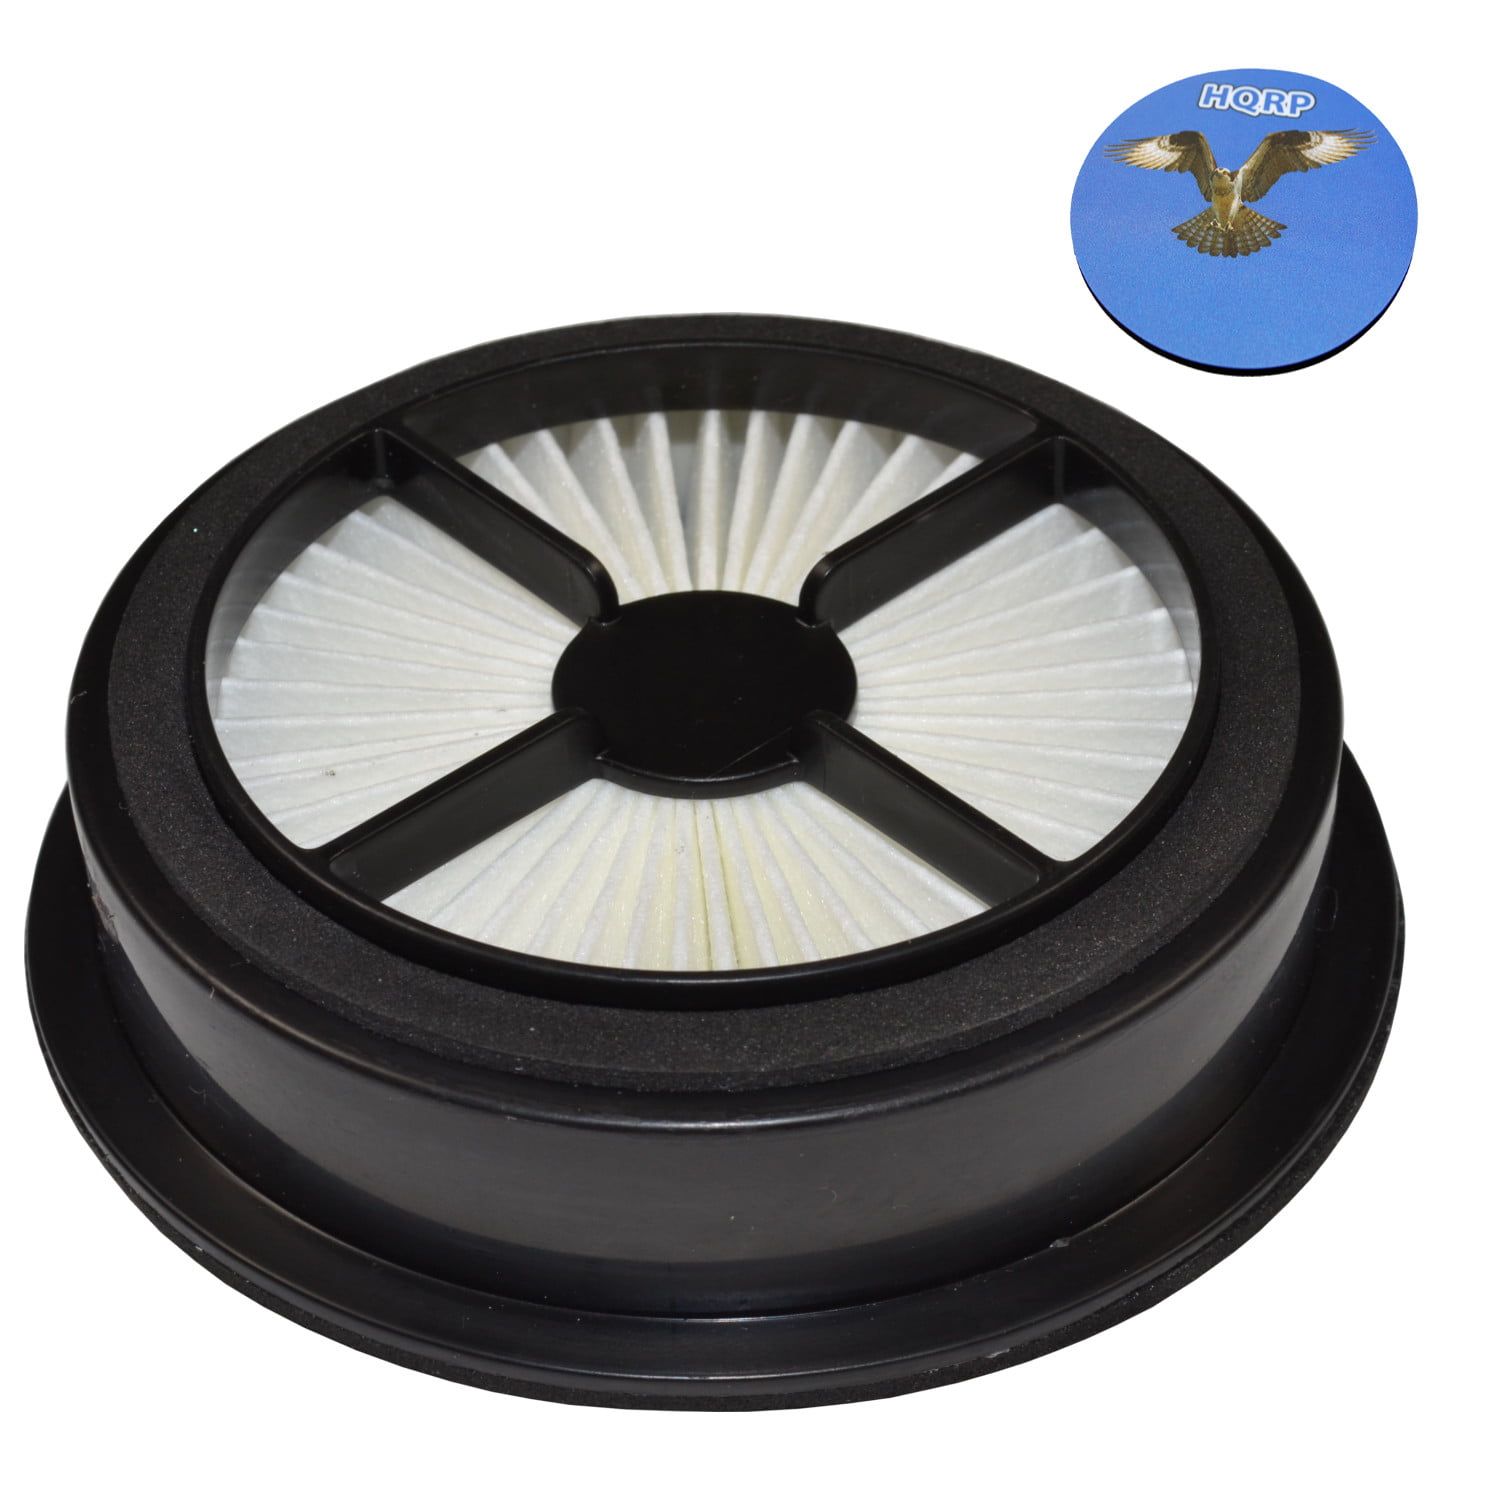 1-7-130852-00 175mm HQRP Washable Pre-Motor HEPA Filter for Vax 1-7-131400-00 